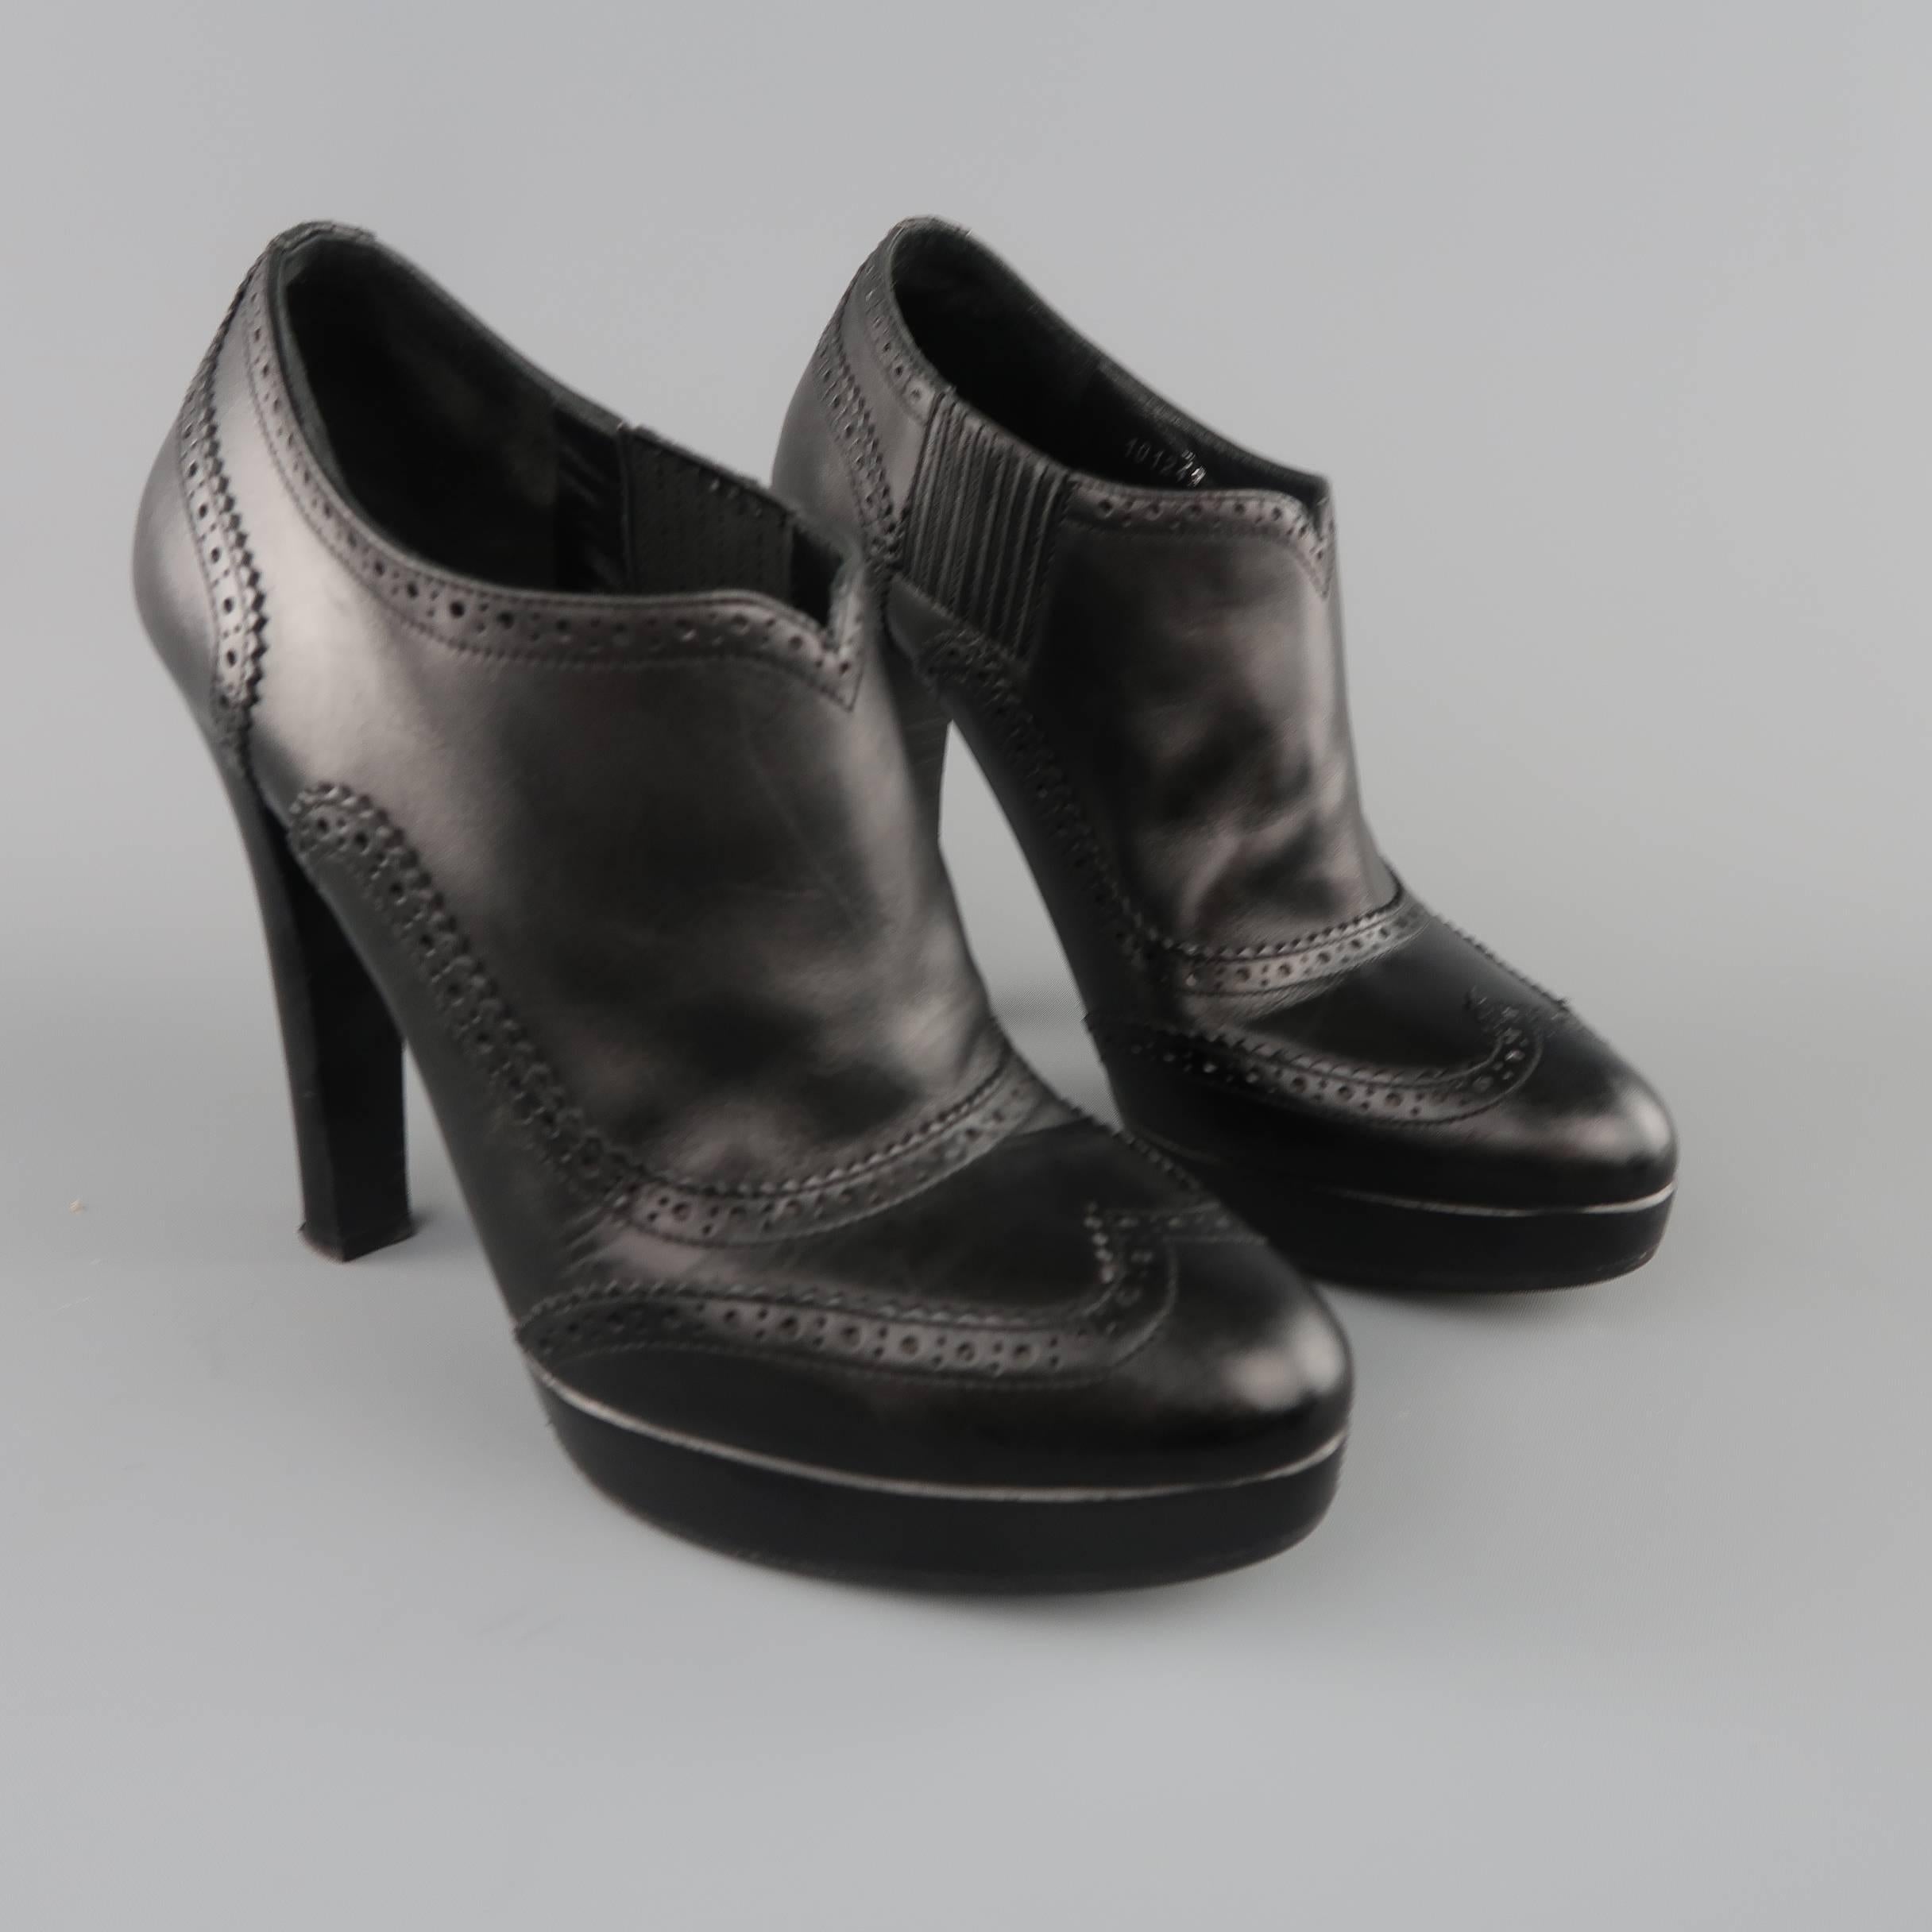 RALPH LAUREN COLLECTION platform booties come in smooth black leather and feature a rounded point toe, stacked heel and platform, and perforated wingtip details throughout. Made in Italy.
 
Good Pre-Owned Condition.
Marked: 7.5 B
 
Measurements:
